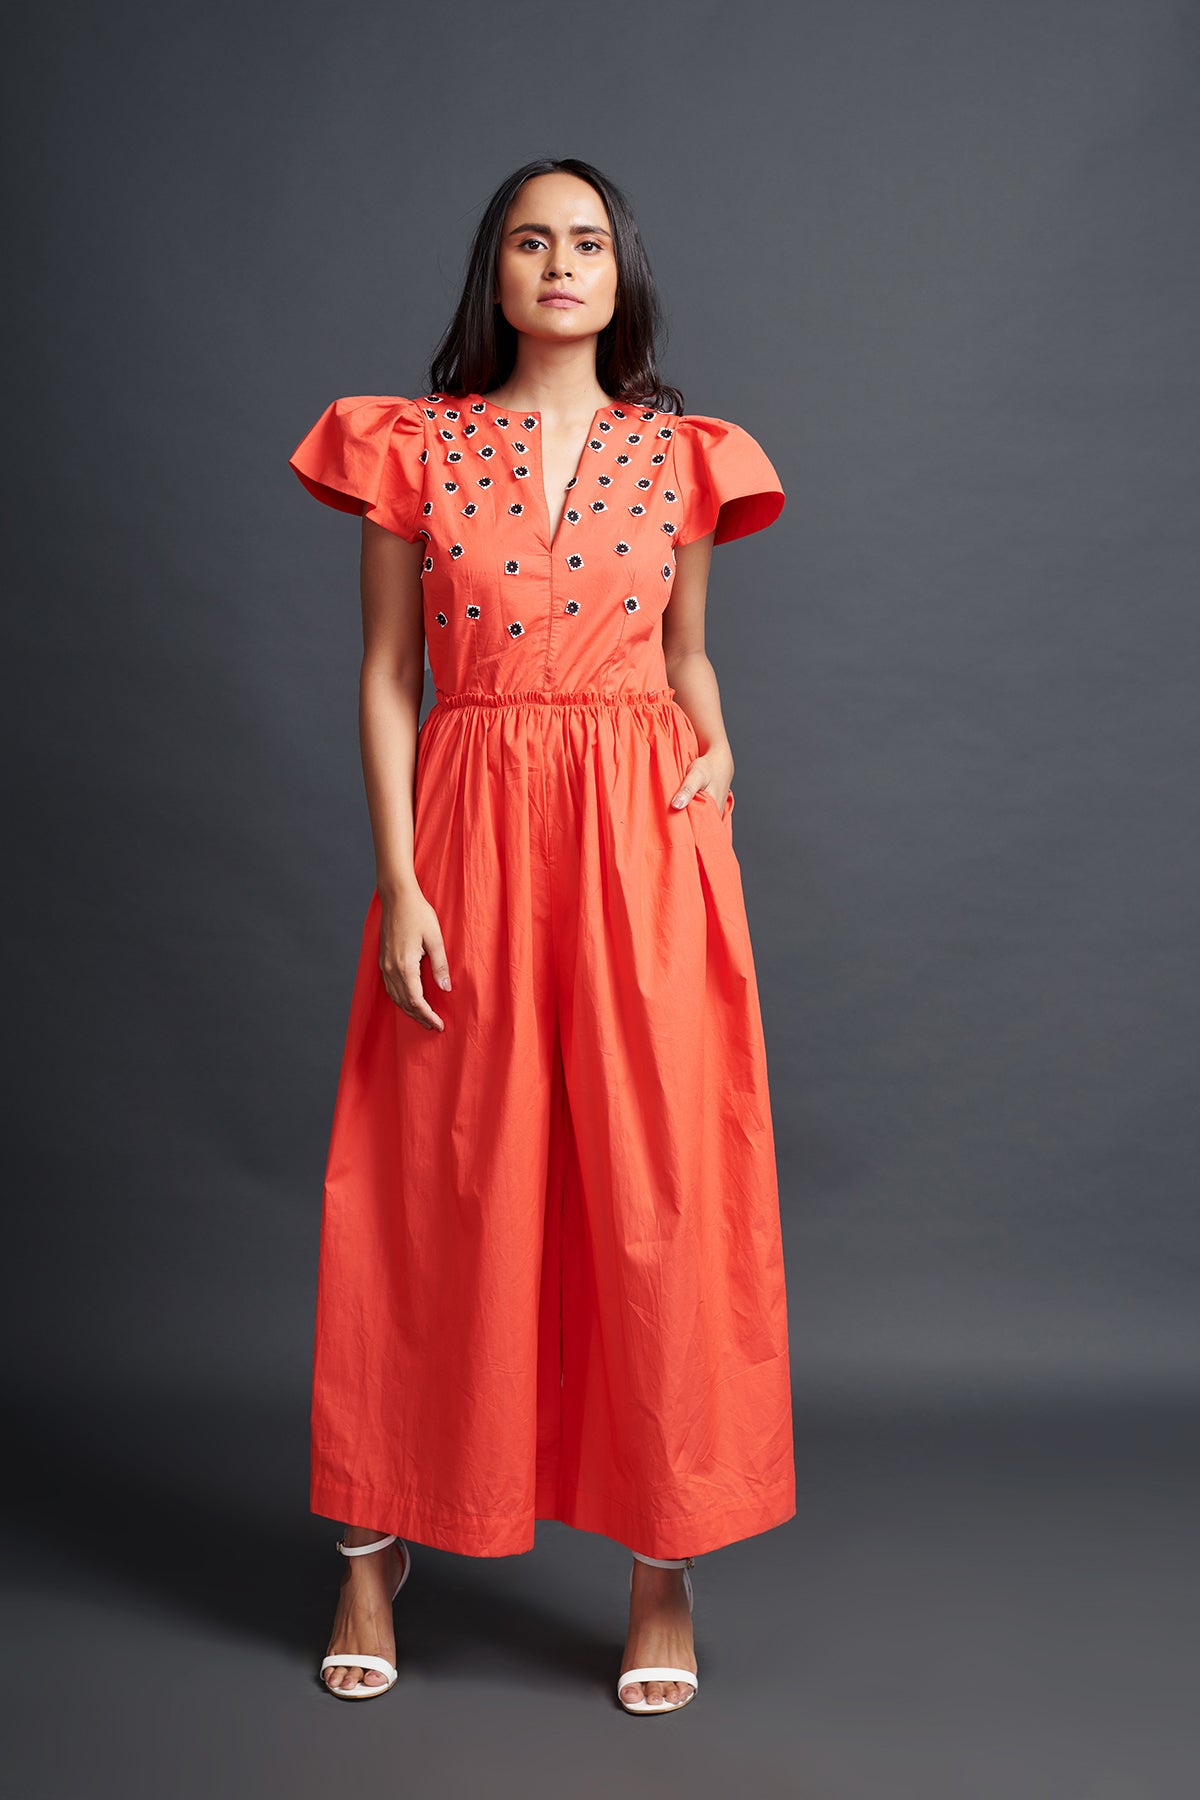 Image of ORANGE BACKLESS JUMPSUIT IN COTTON BASE WITH CUTWORK EMBROIDERY. From savoirfashions.com